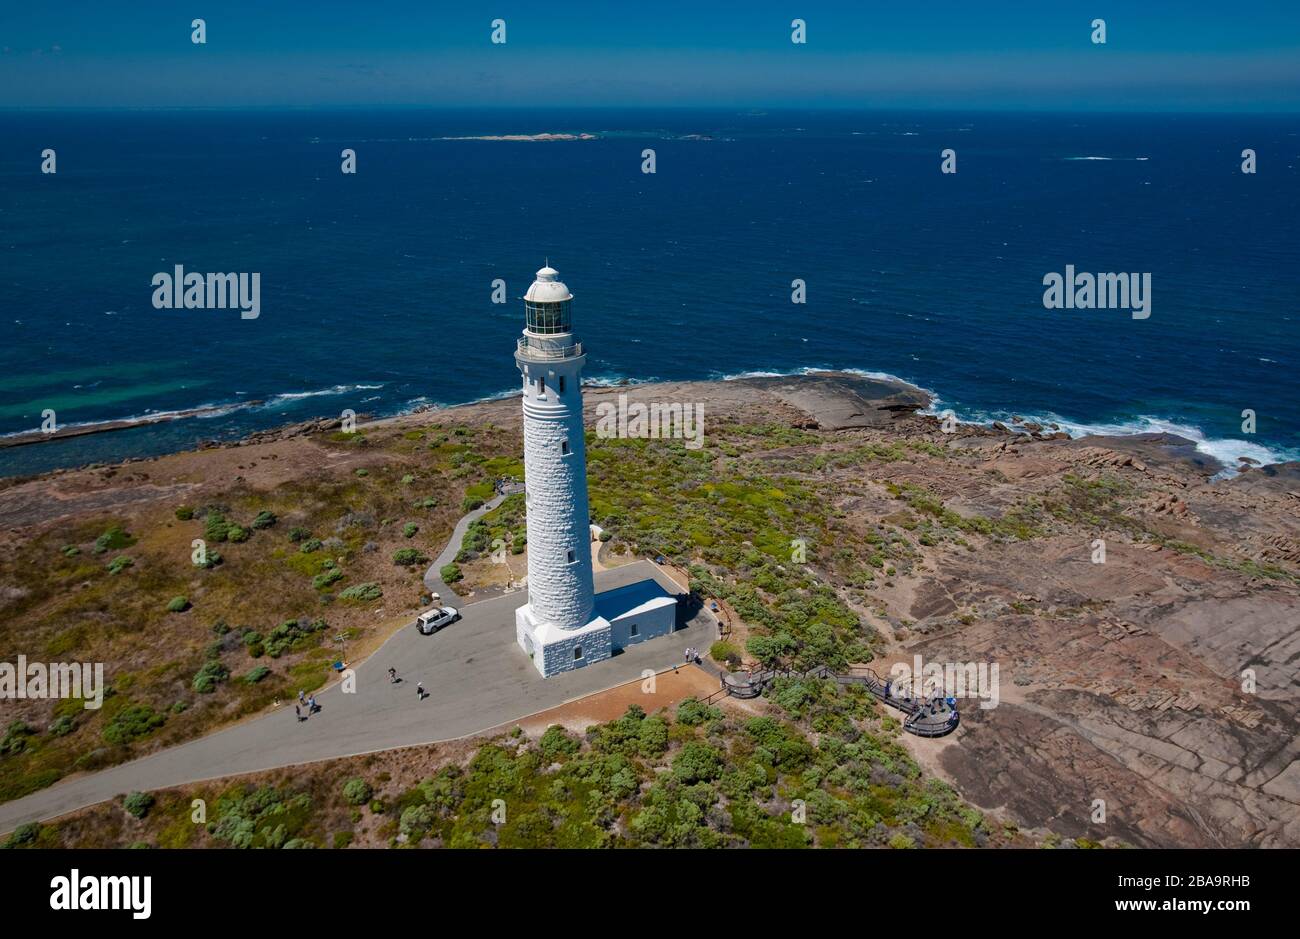 A helicopter view of the Cape Leeuwin lighthouse on the most southern/western tip of Australia. Stock Photo